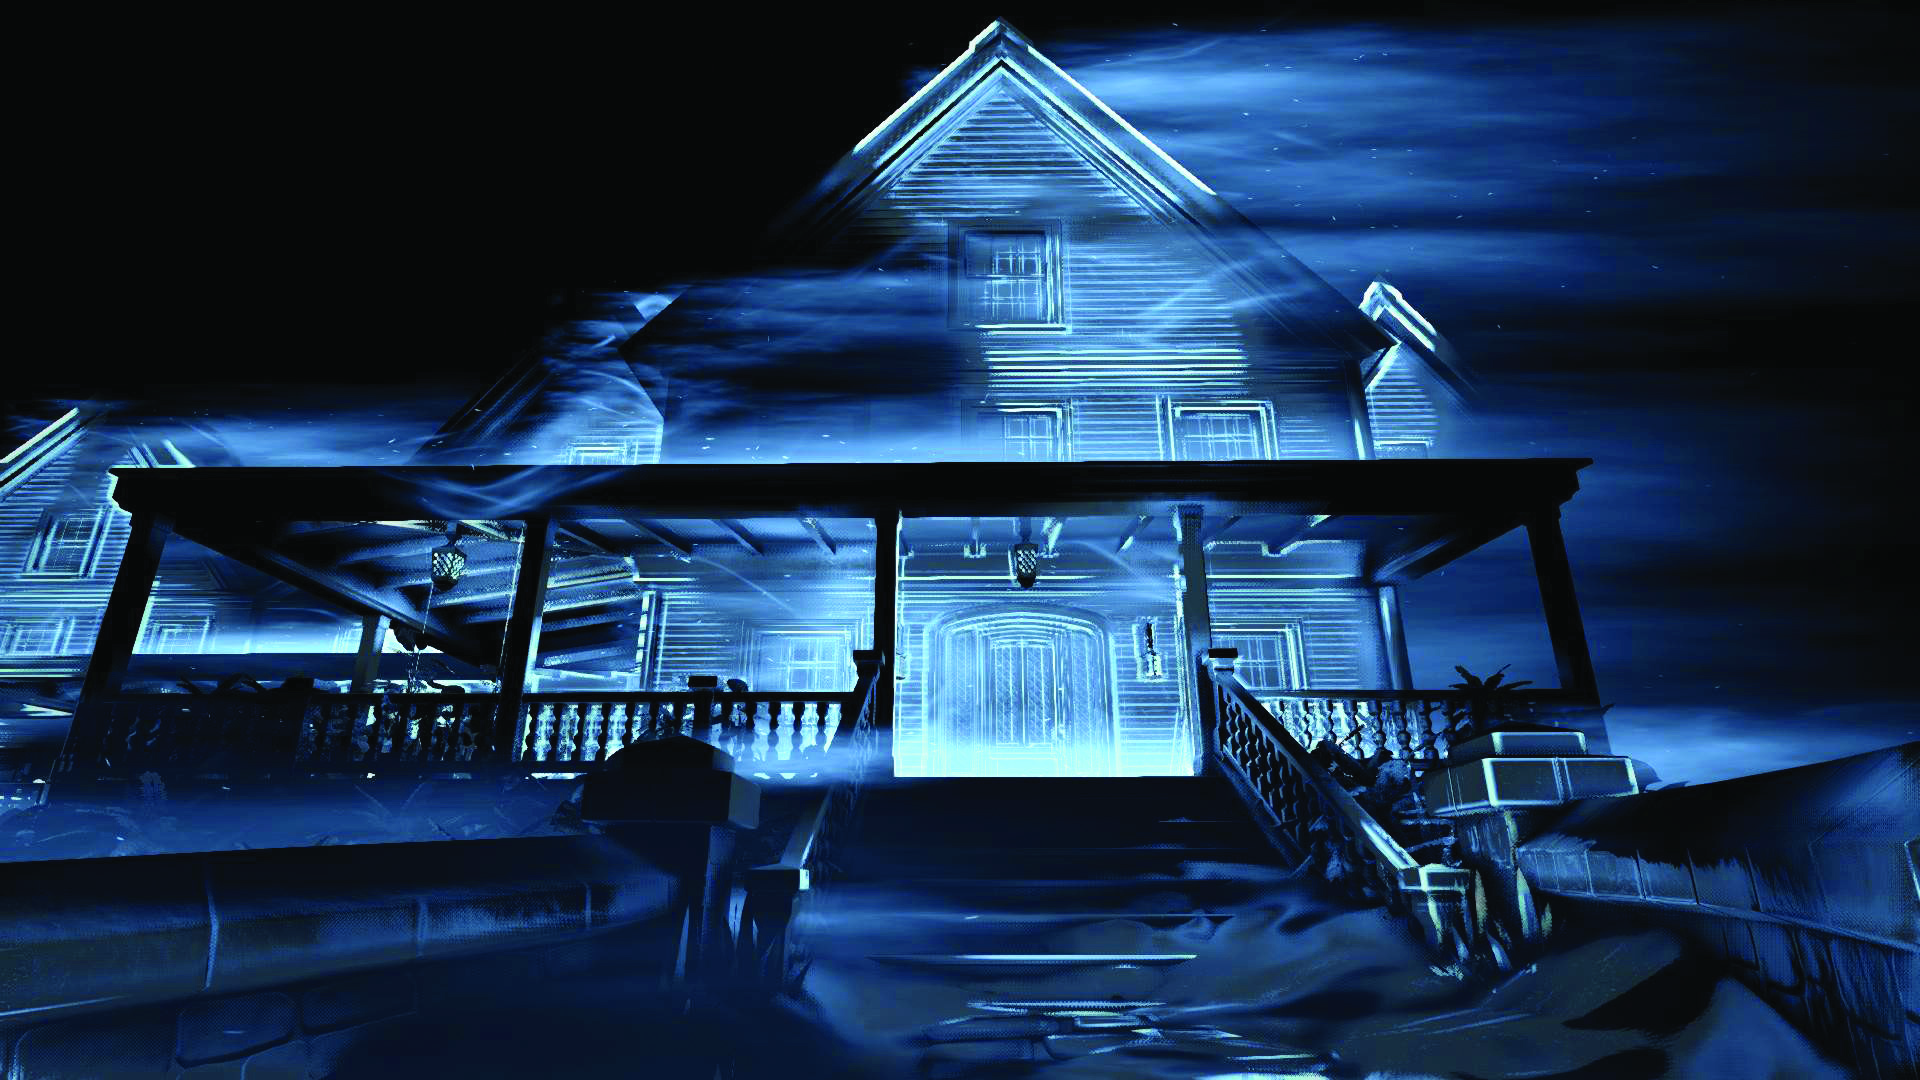 Perception’s haunted house revamped with new difficulty modes and plot points